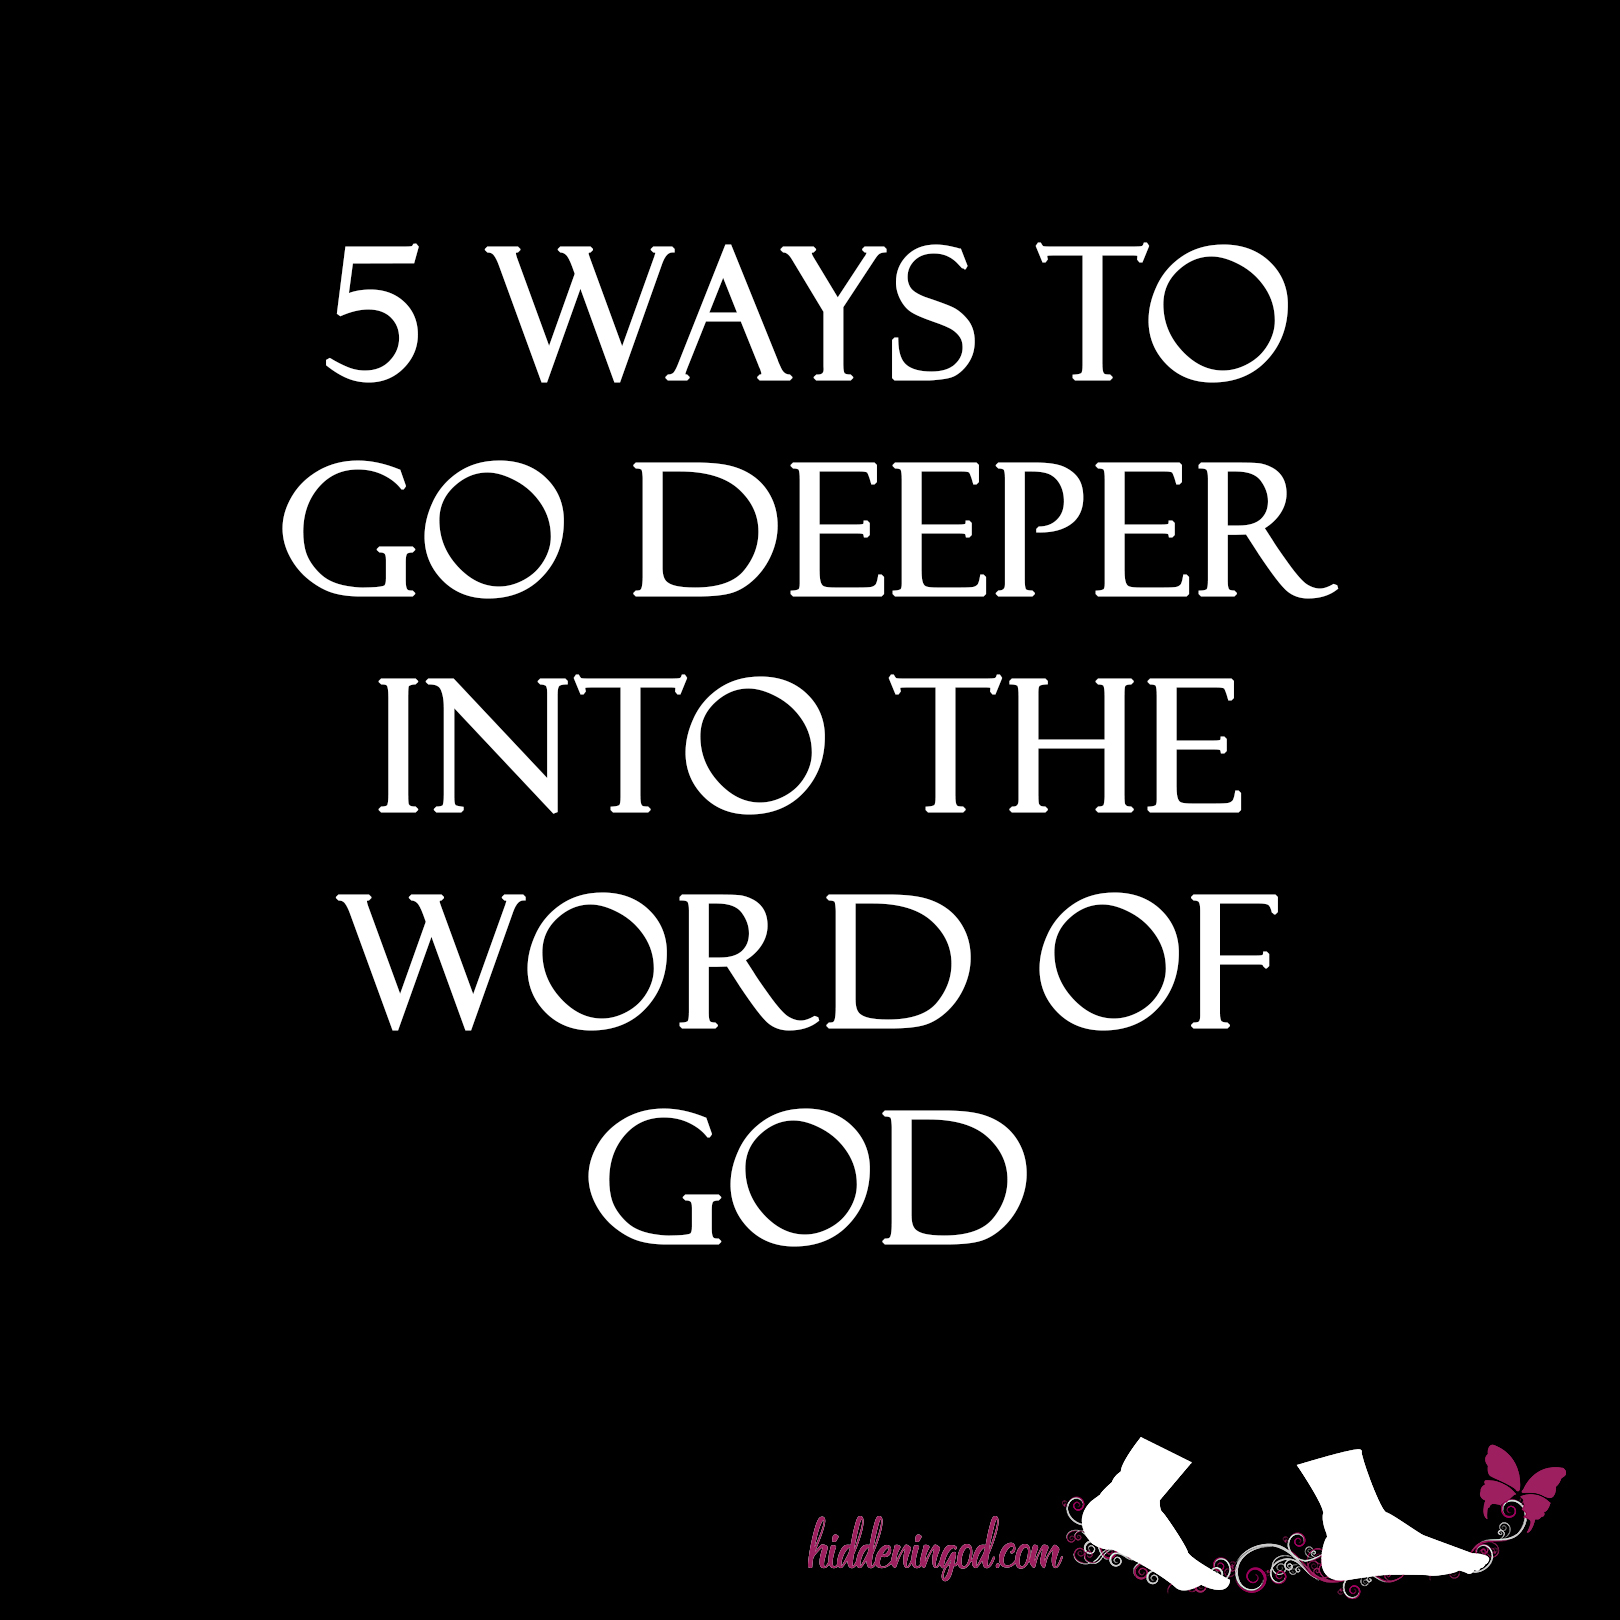 5 Ways to Go Deeper Into the Word